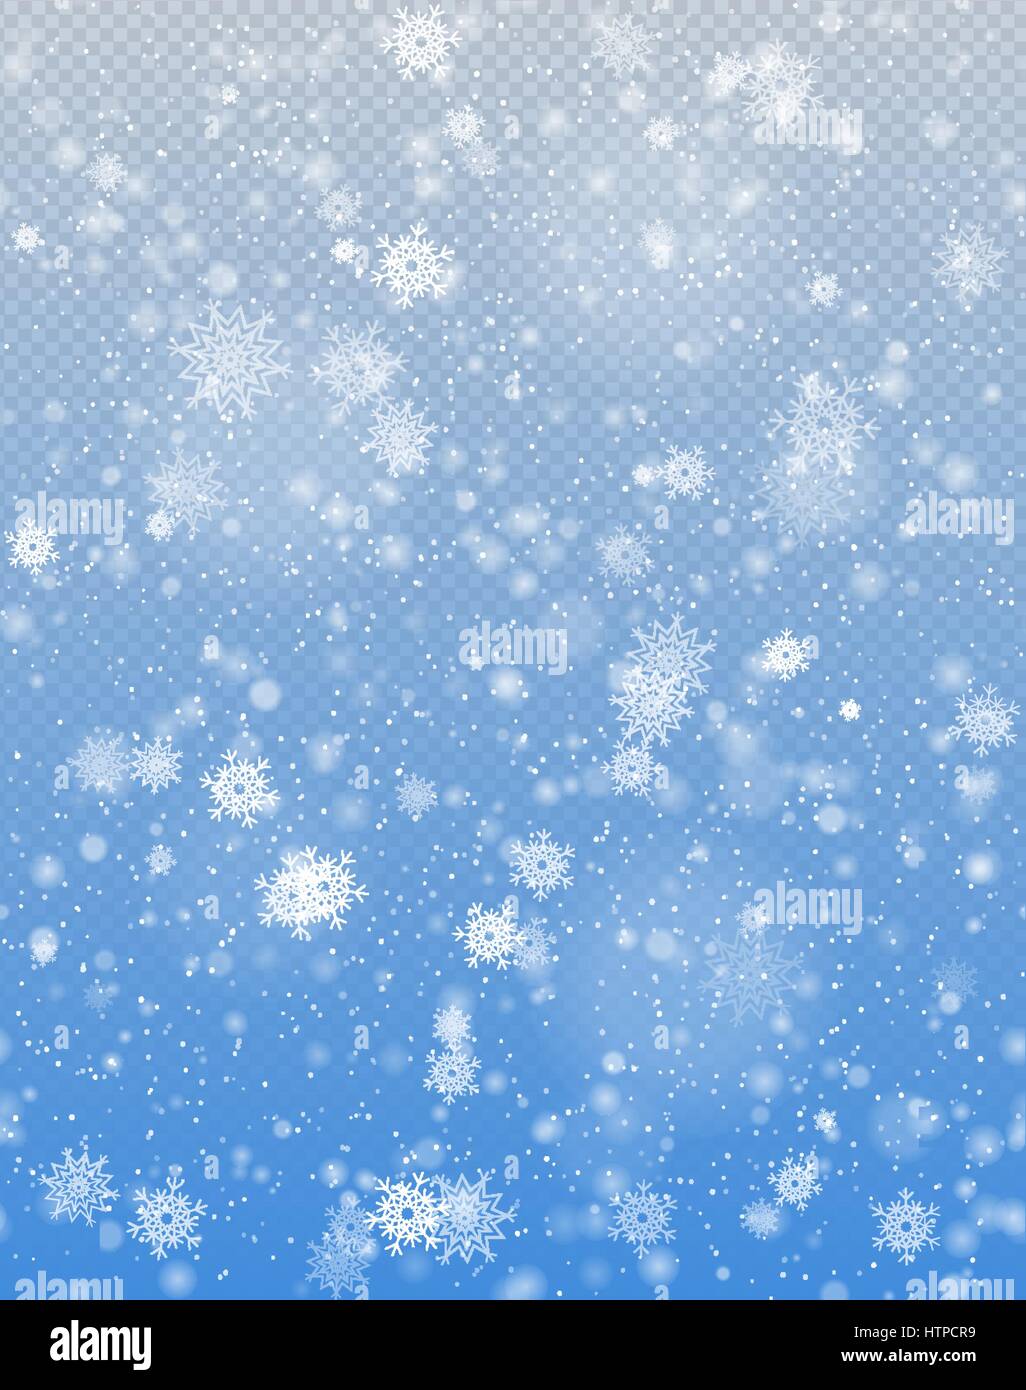 Seamless vector white snowfall effect on blue transparent background. Winter falling snow texture. Delicate white snowflake Christmas backdrop Stock Vector